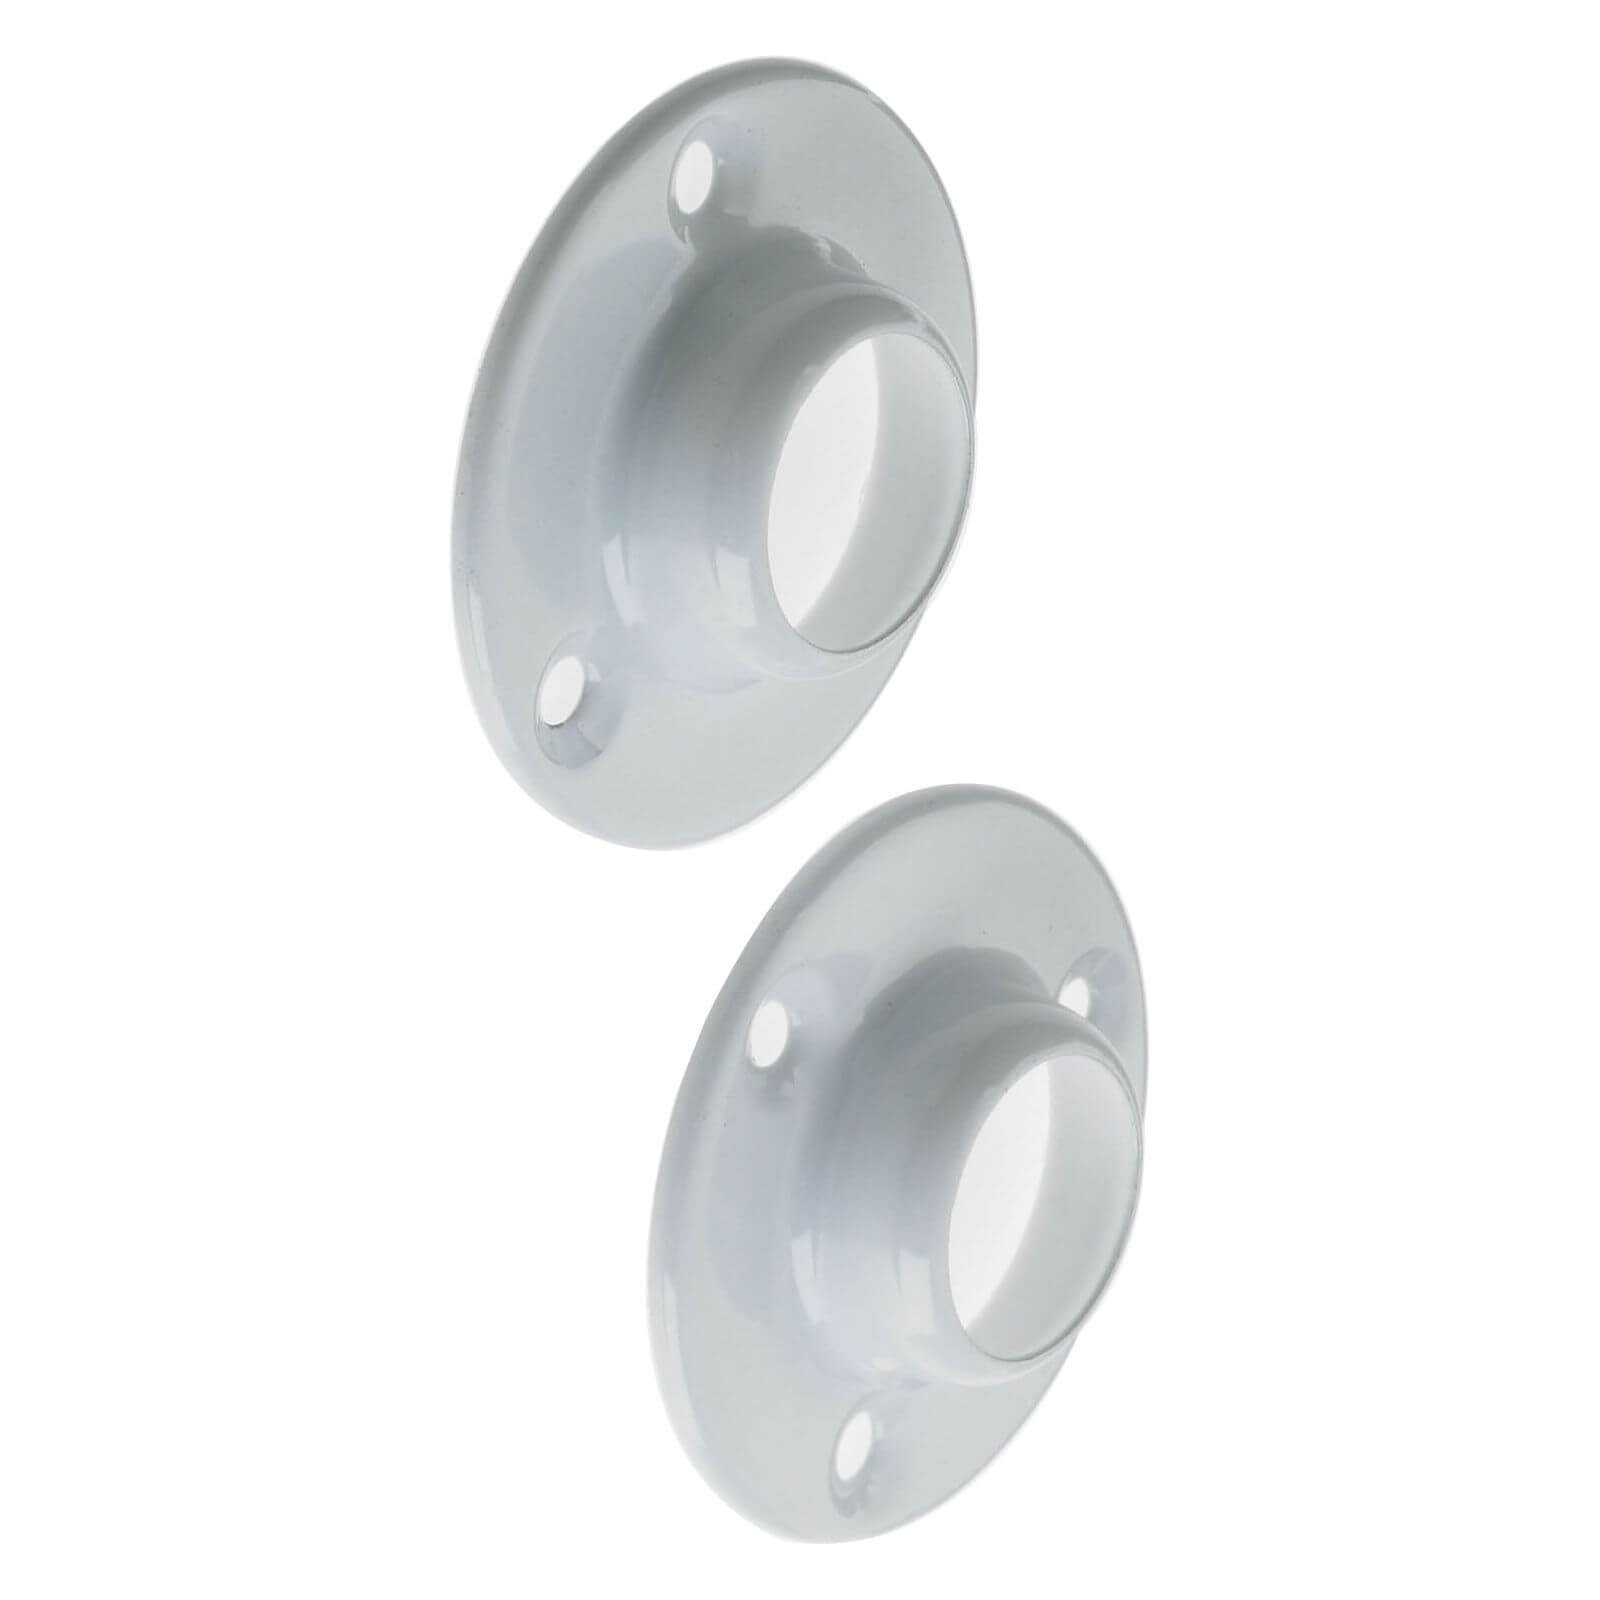 Photo of Deluxe Sockets - White - 19mm